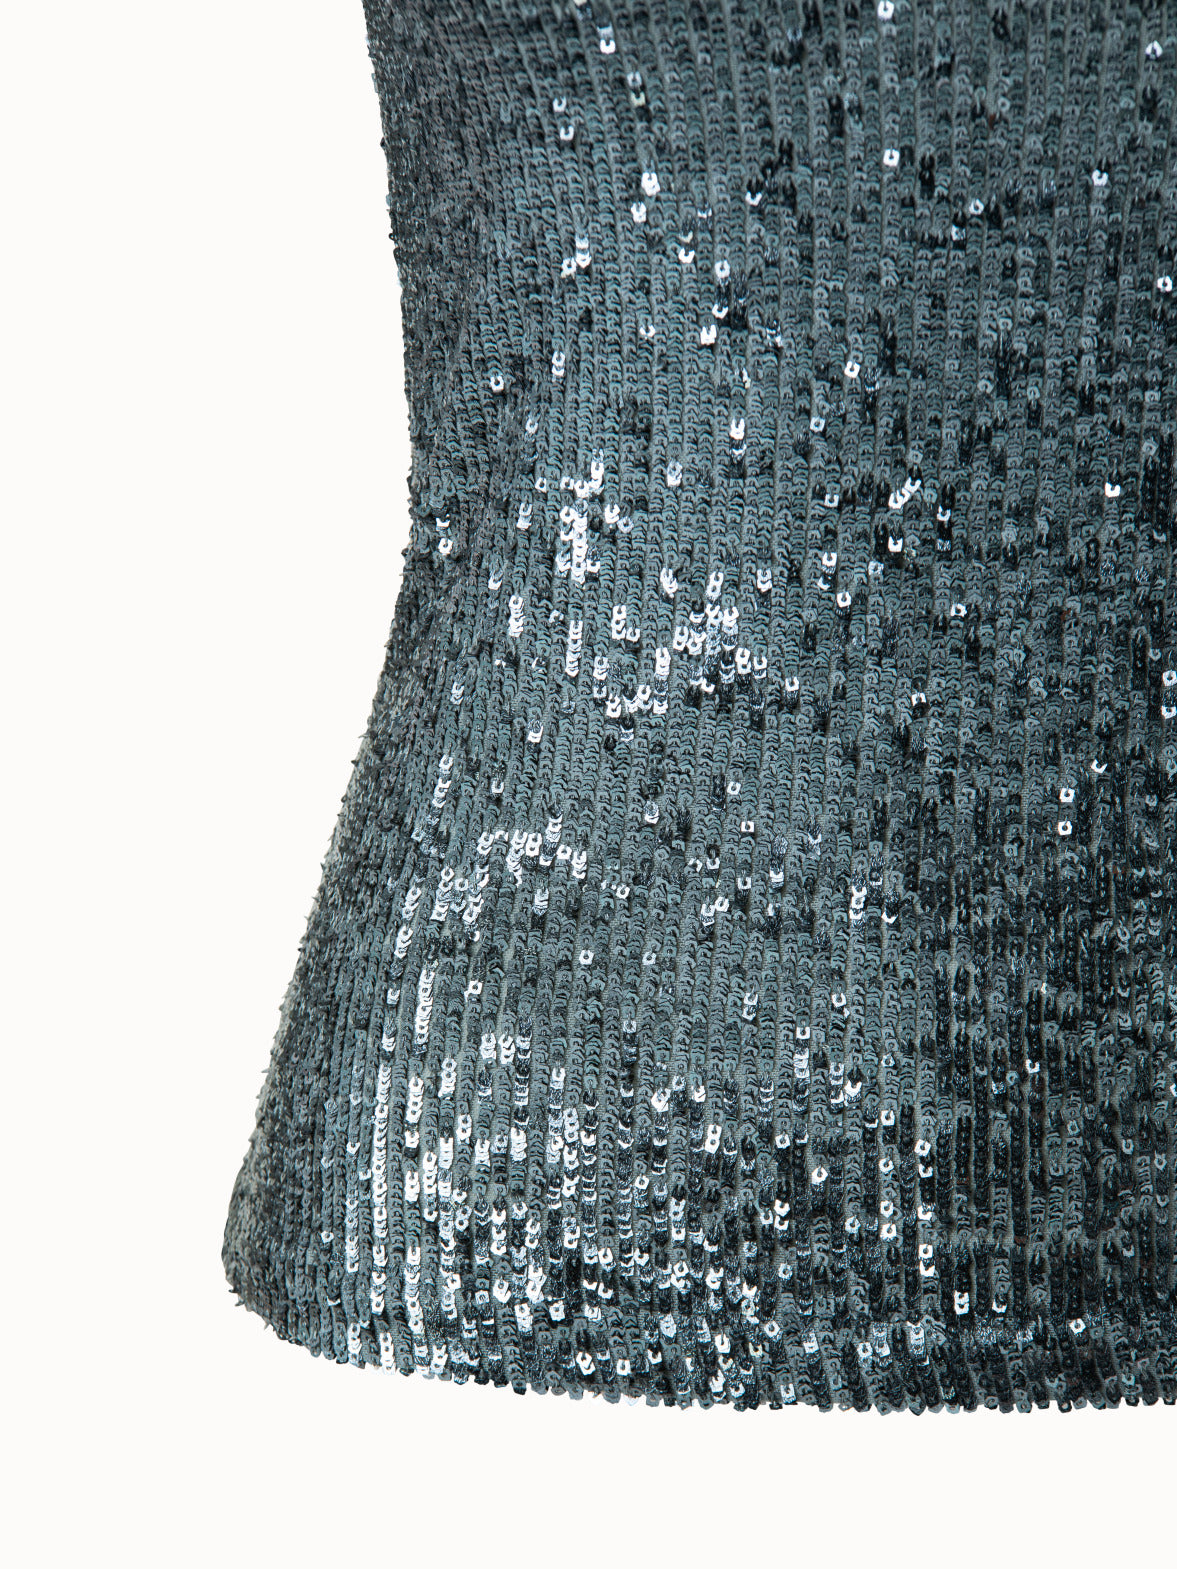 Sequins On Jersey Tank